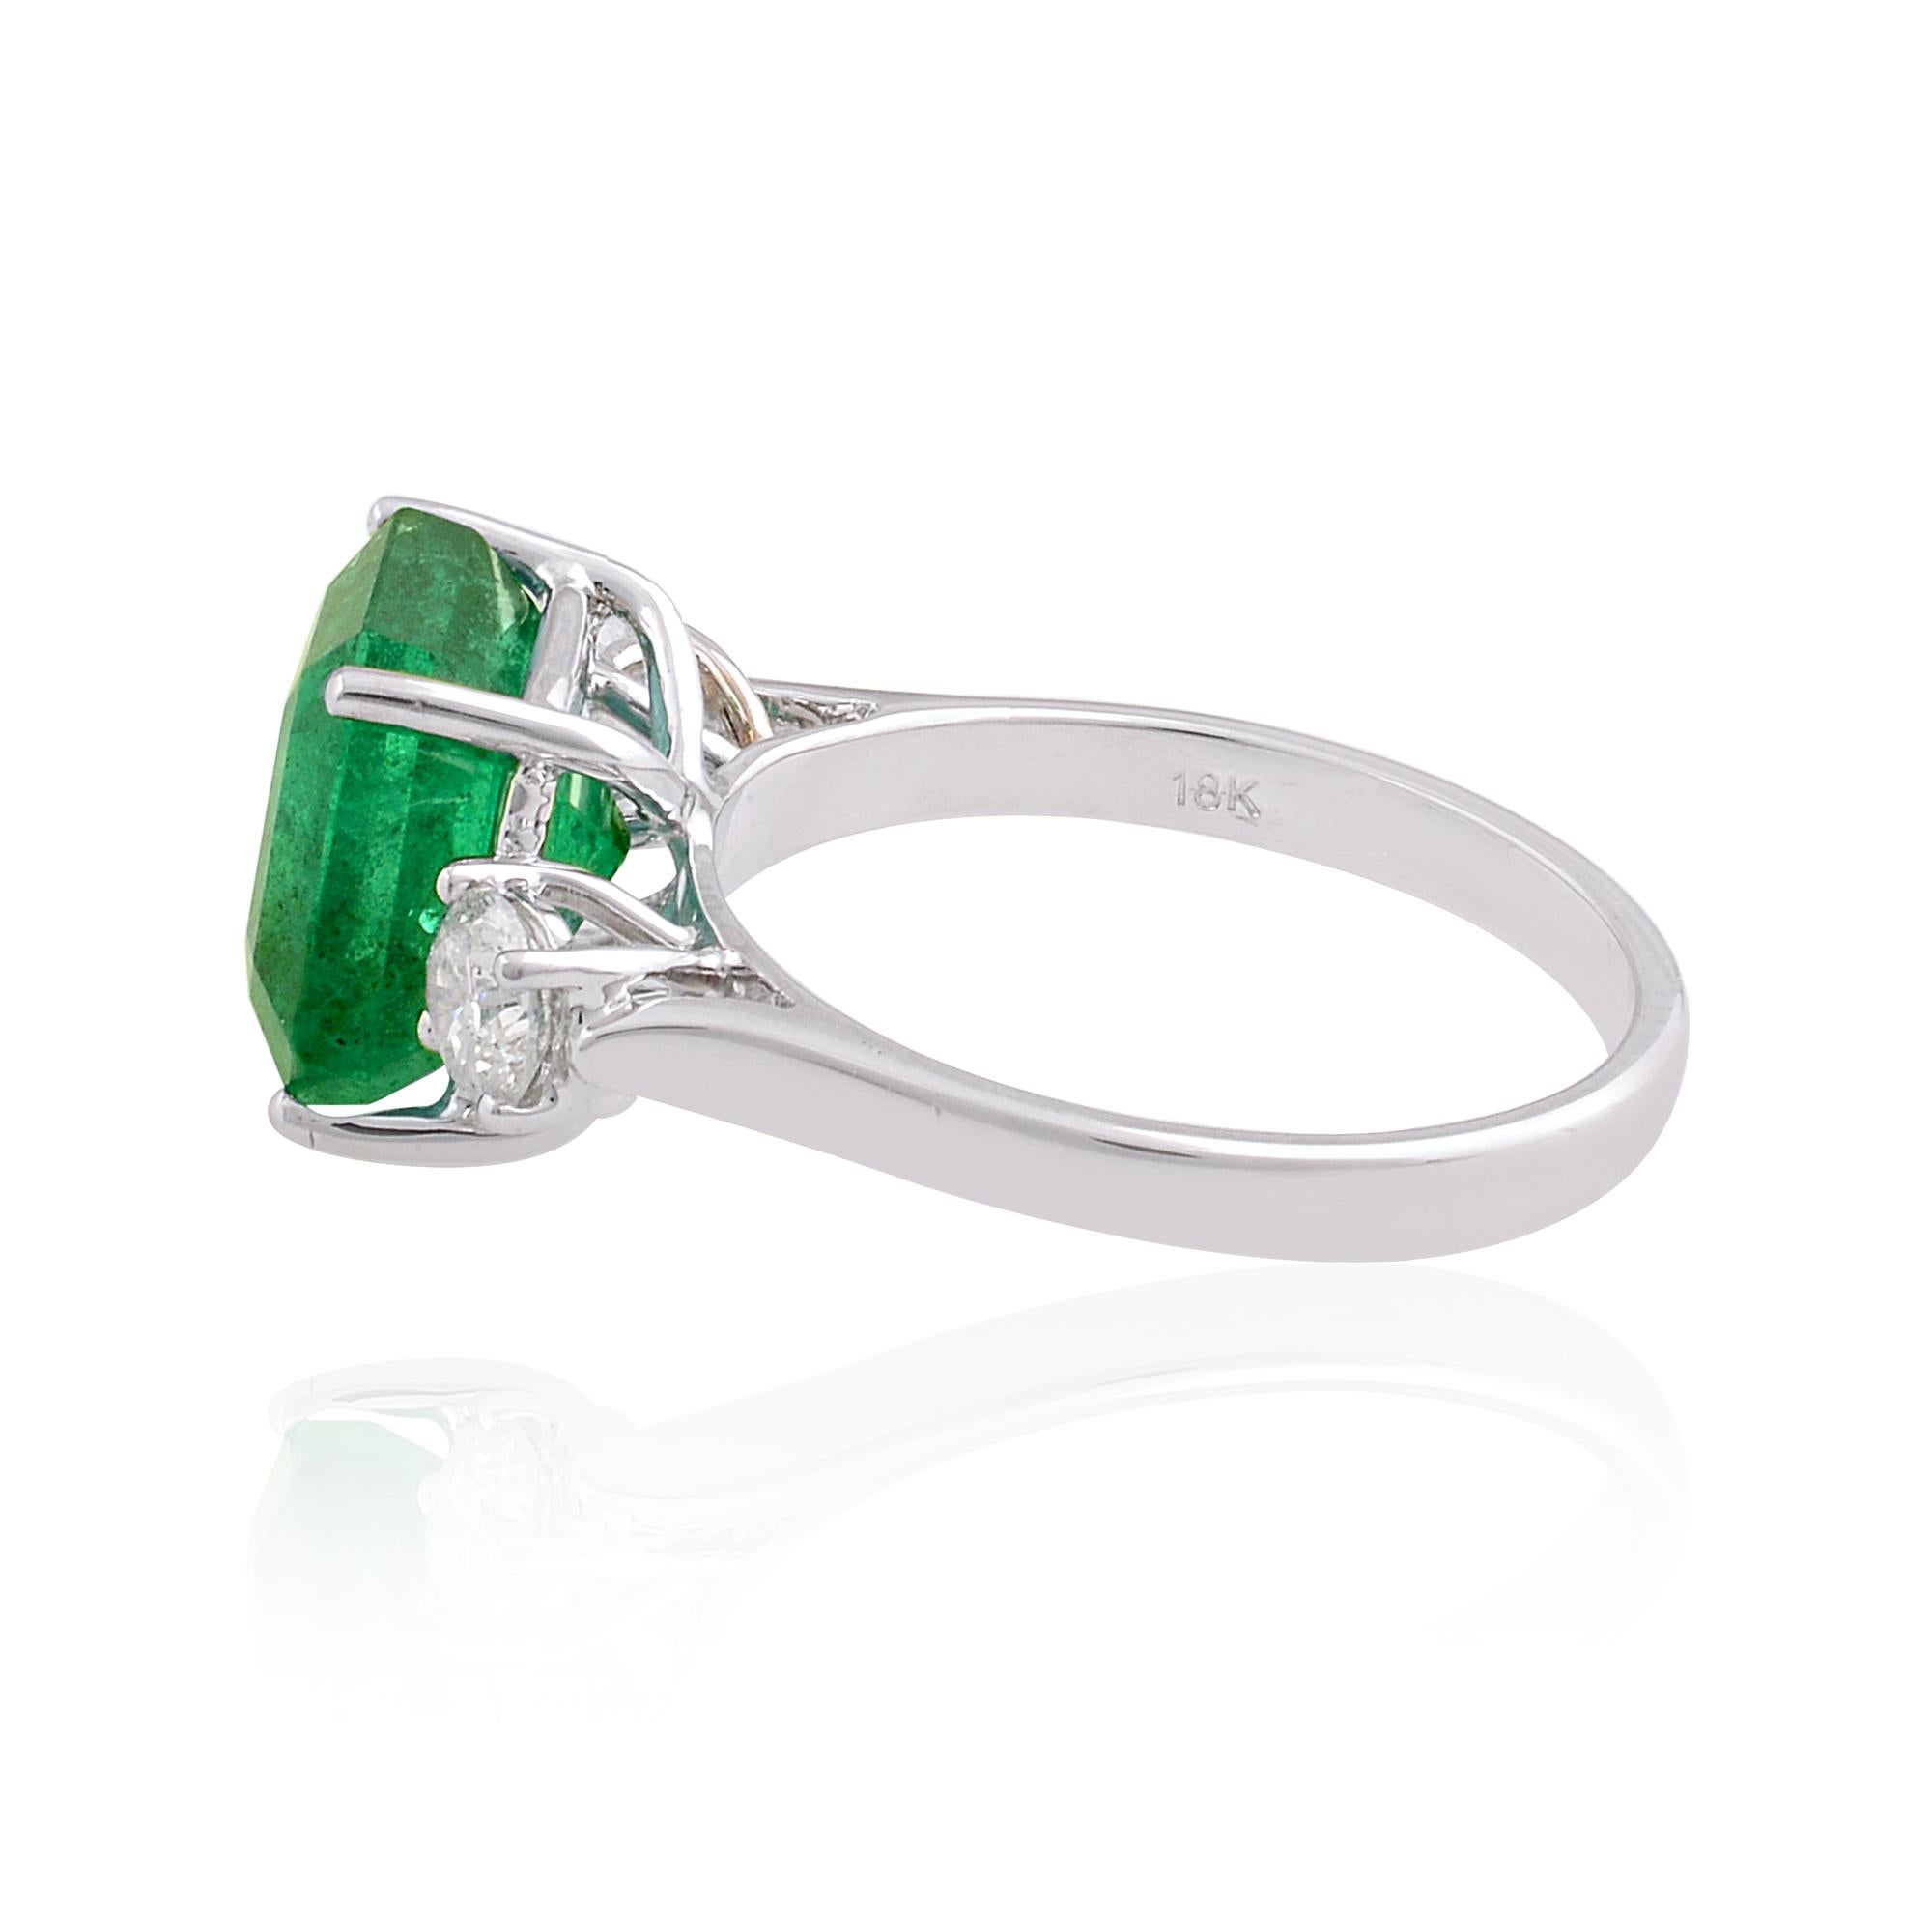 For Sale:  Natural Emerald Gemstone Cocktail Ring Diamond Solid 18k White Gold Fine Jewelry 2